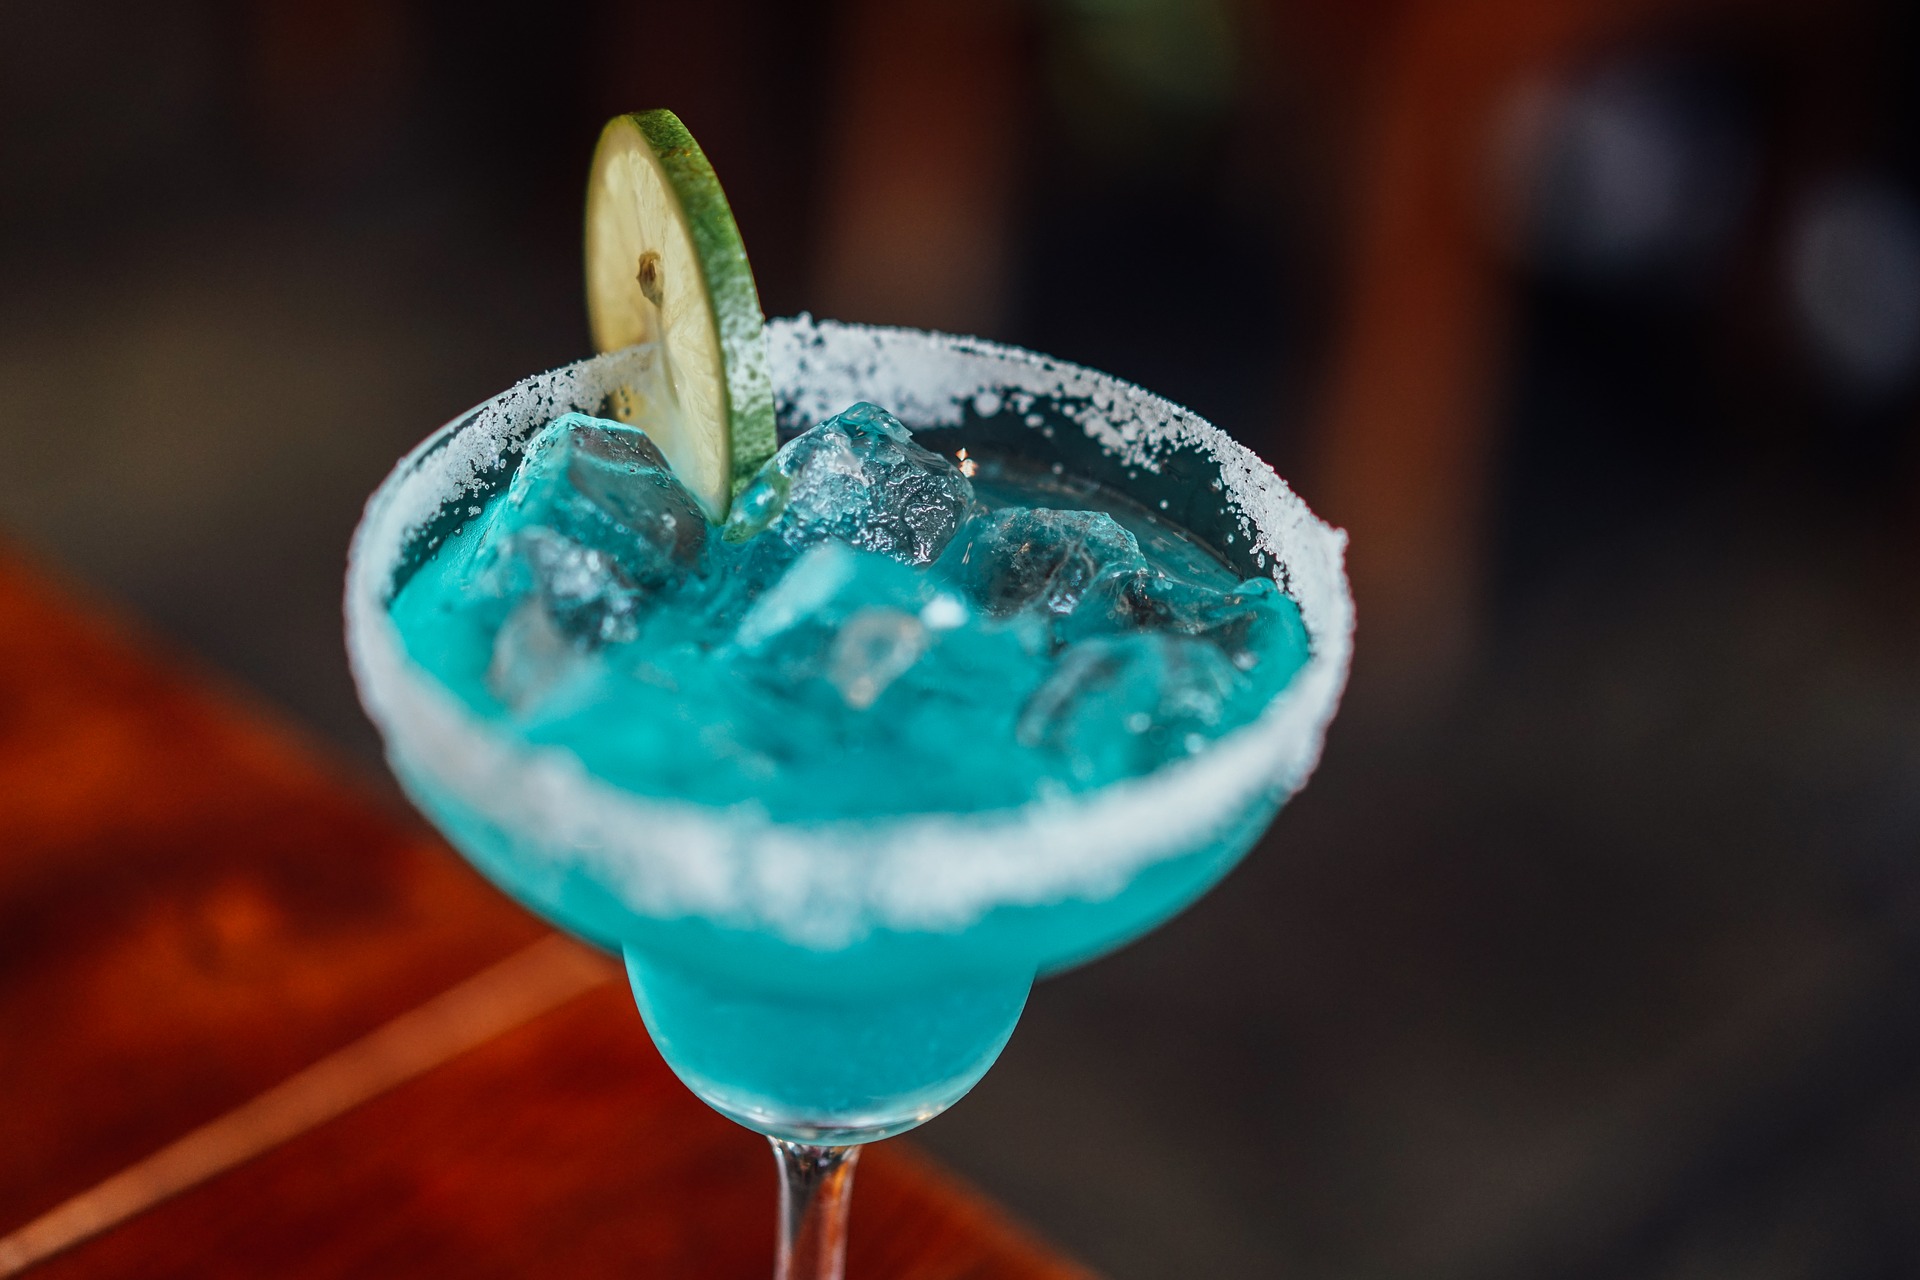 Enjoy cocktails and more at the many great restaurants in Panama City Beach